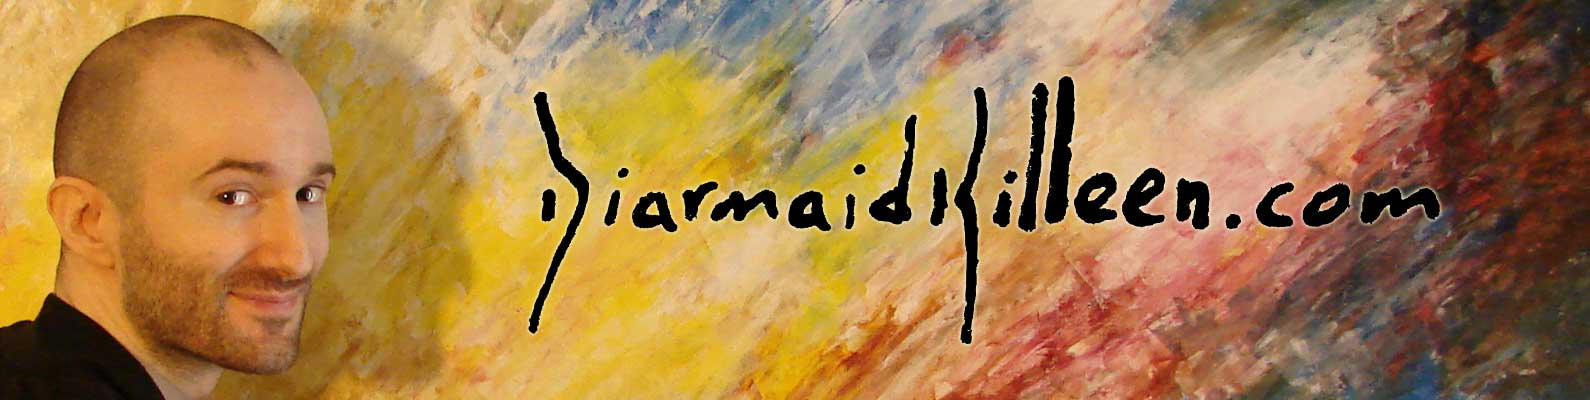 Welcome to DiarmaidKilleen.com, the official hub for the art of Diarmaid Killeen.